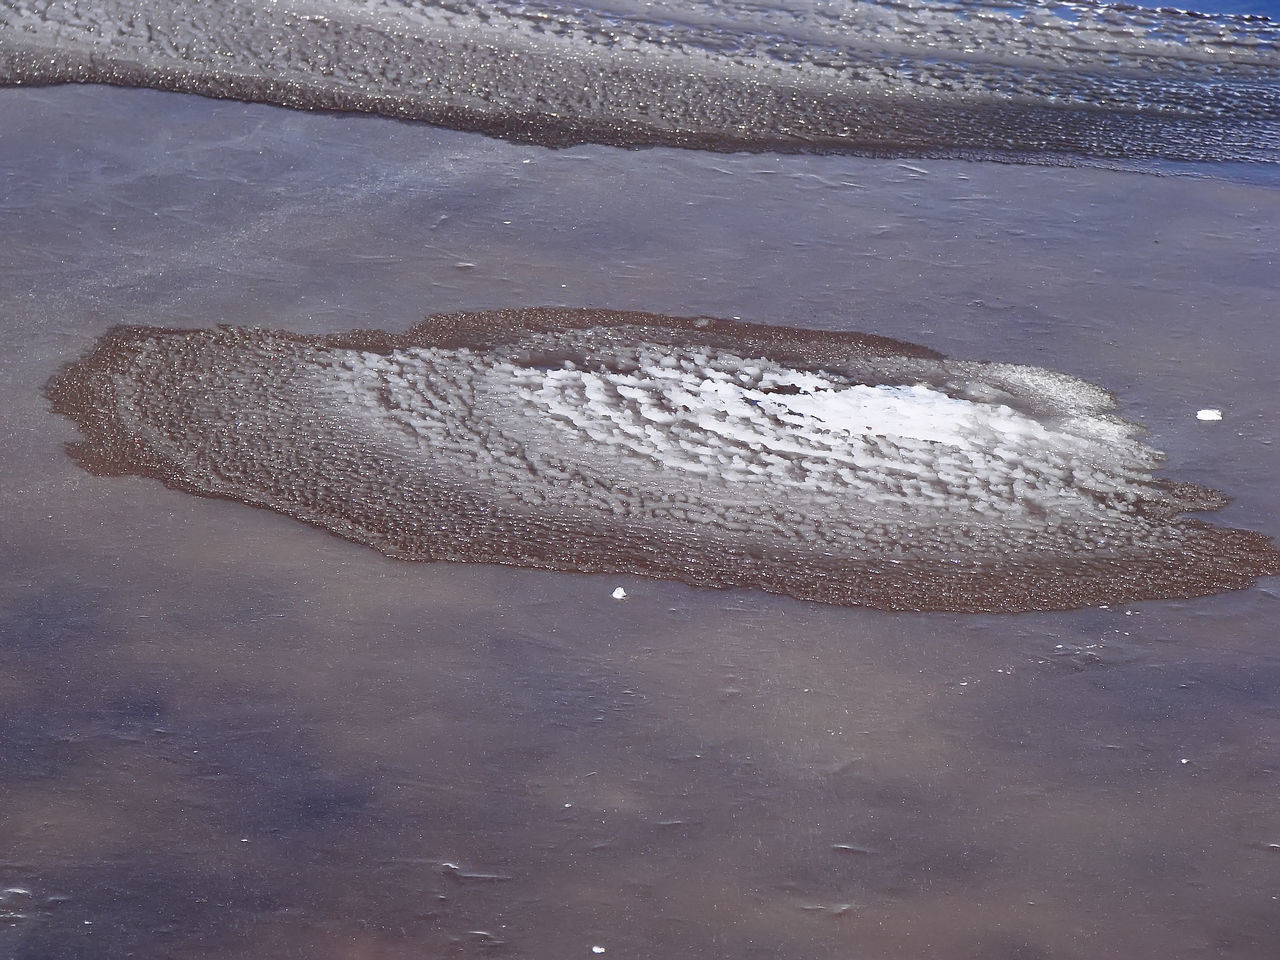 HIGH ANGLE VIEW OF PUDDLE ON WET SHORE